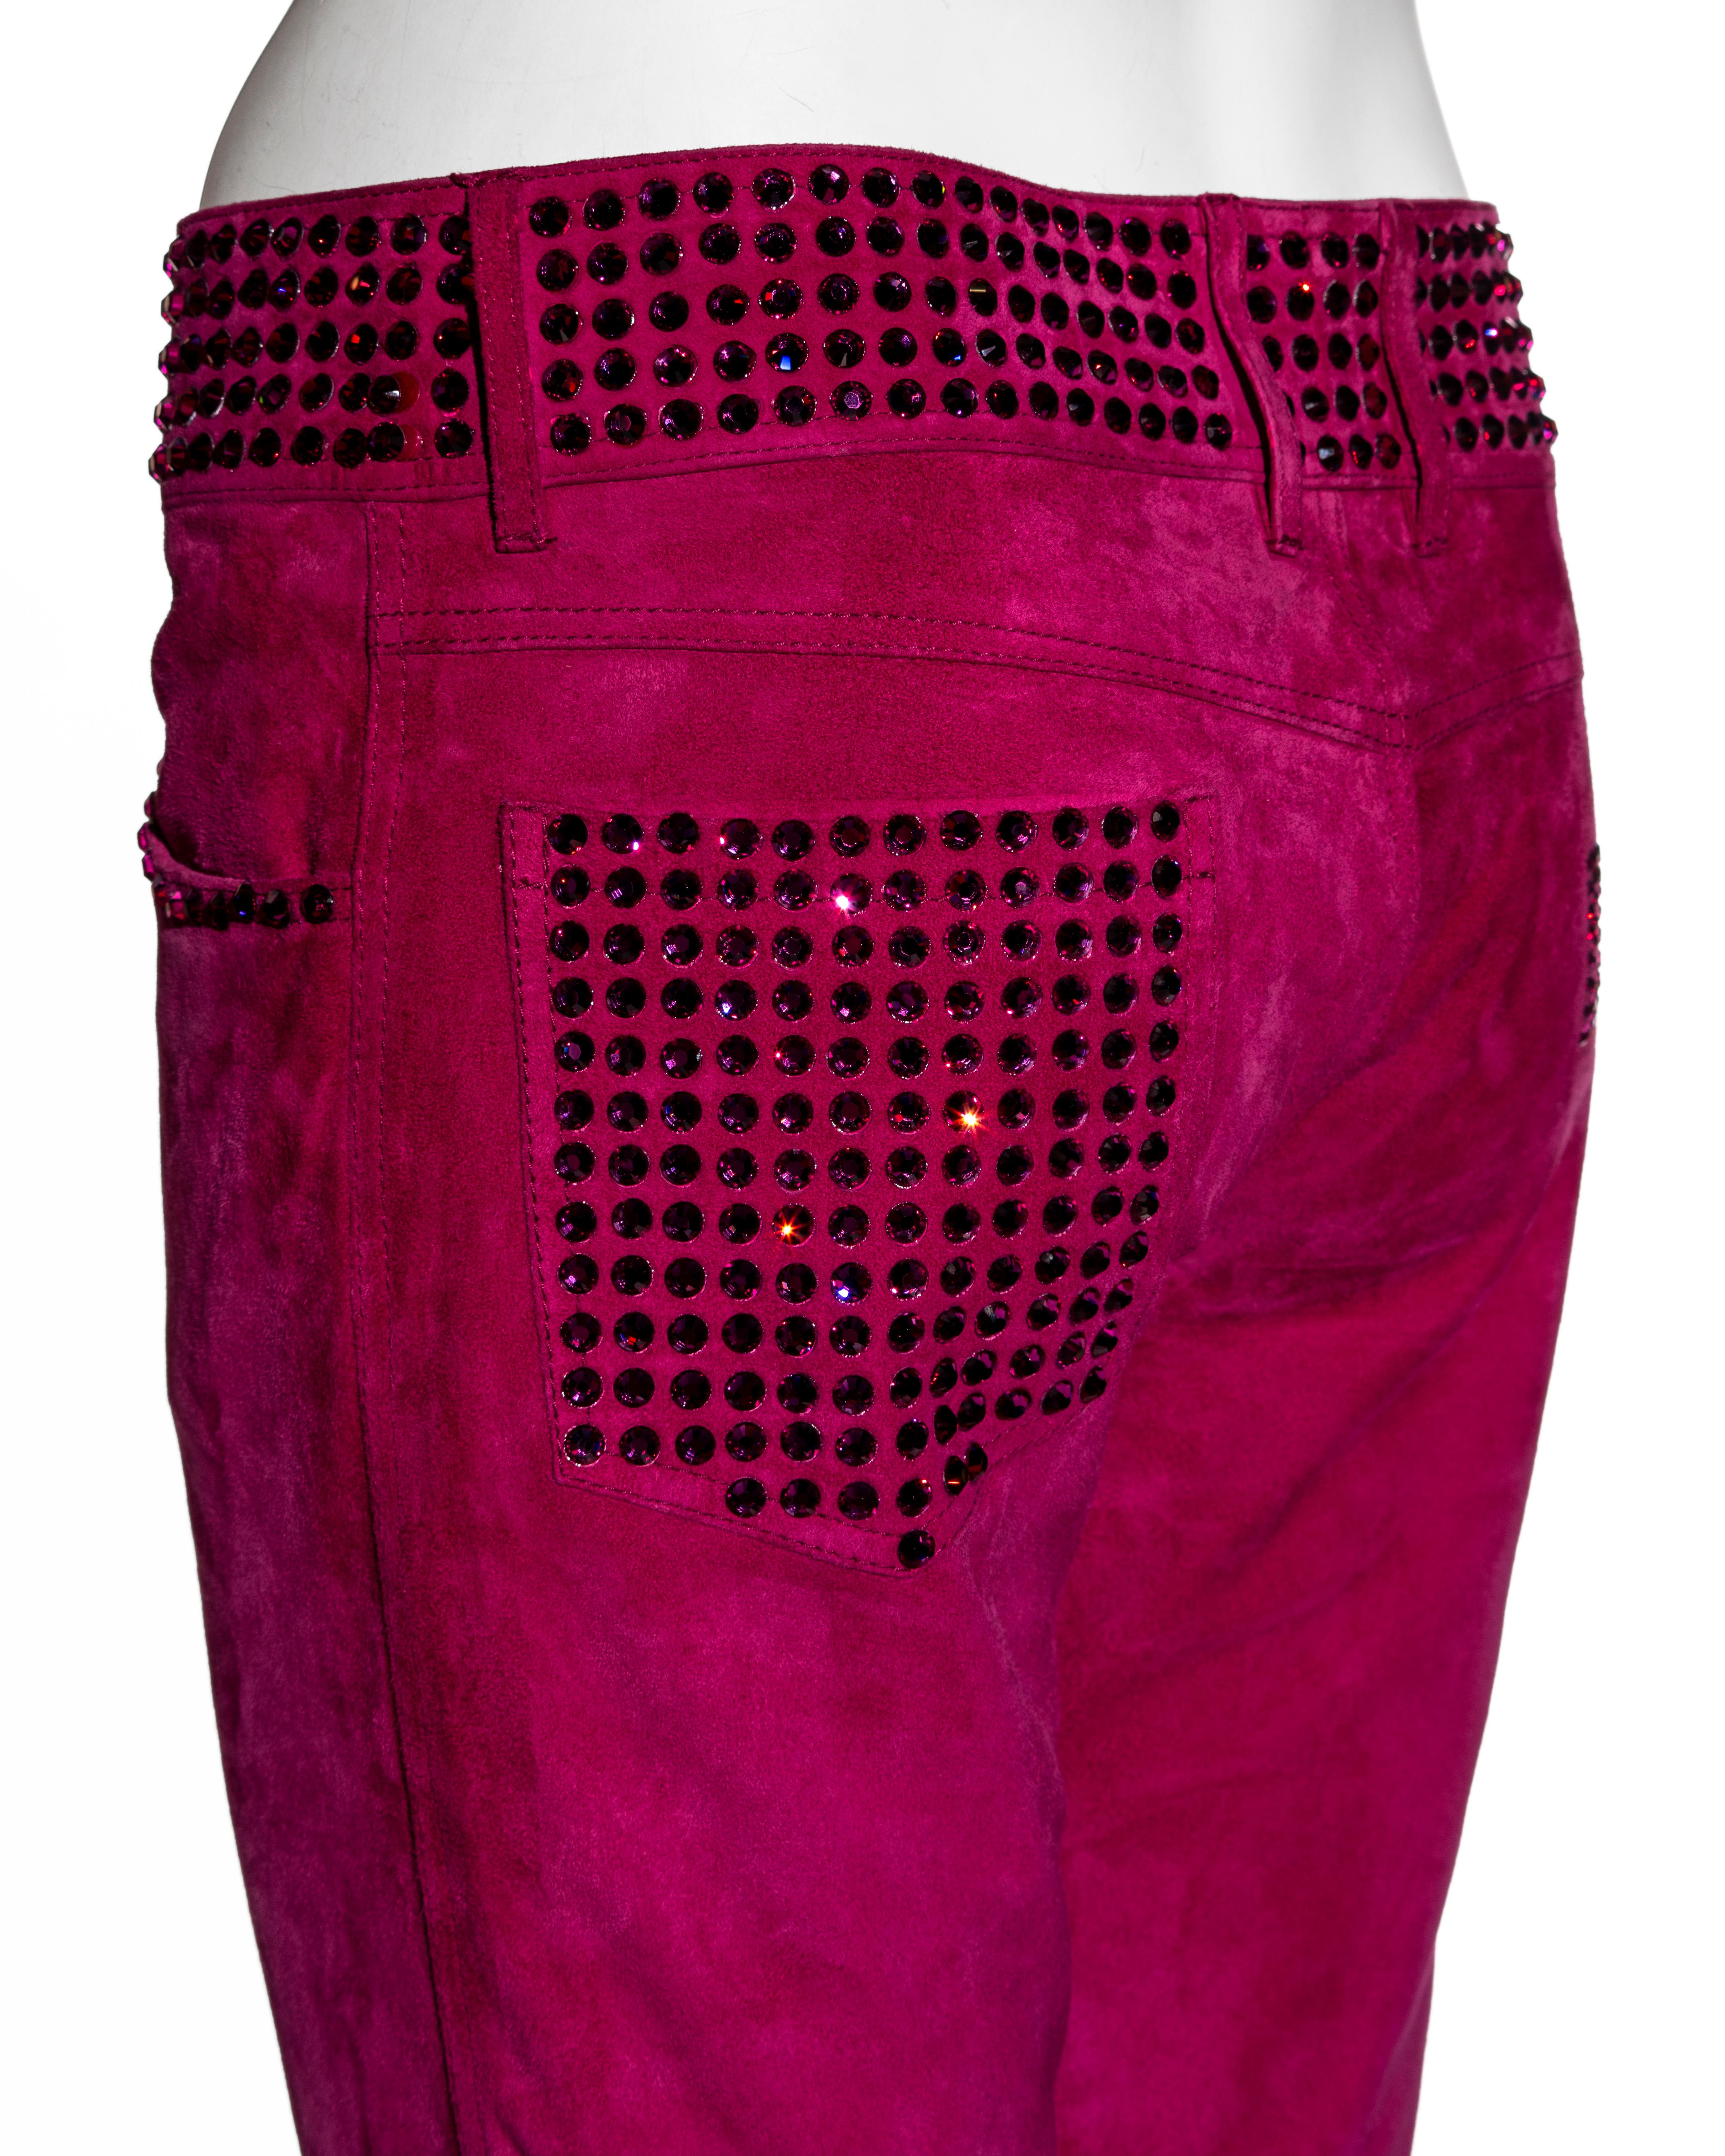 D&G by Dolce & Gabbana pink suede pants with crystals, c. 1998-1999 3